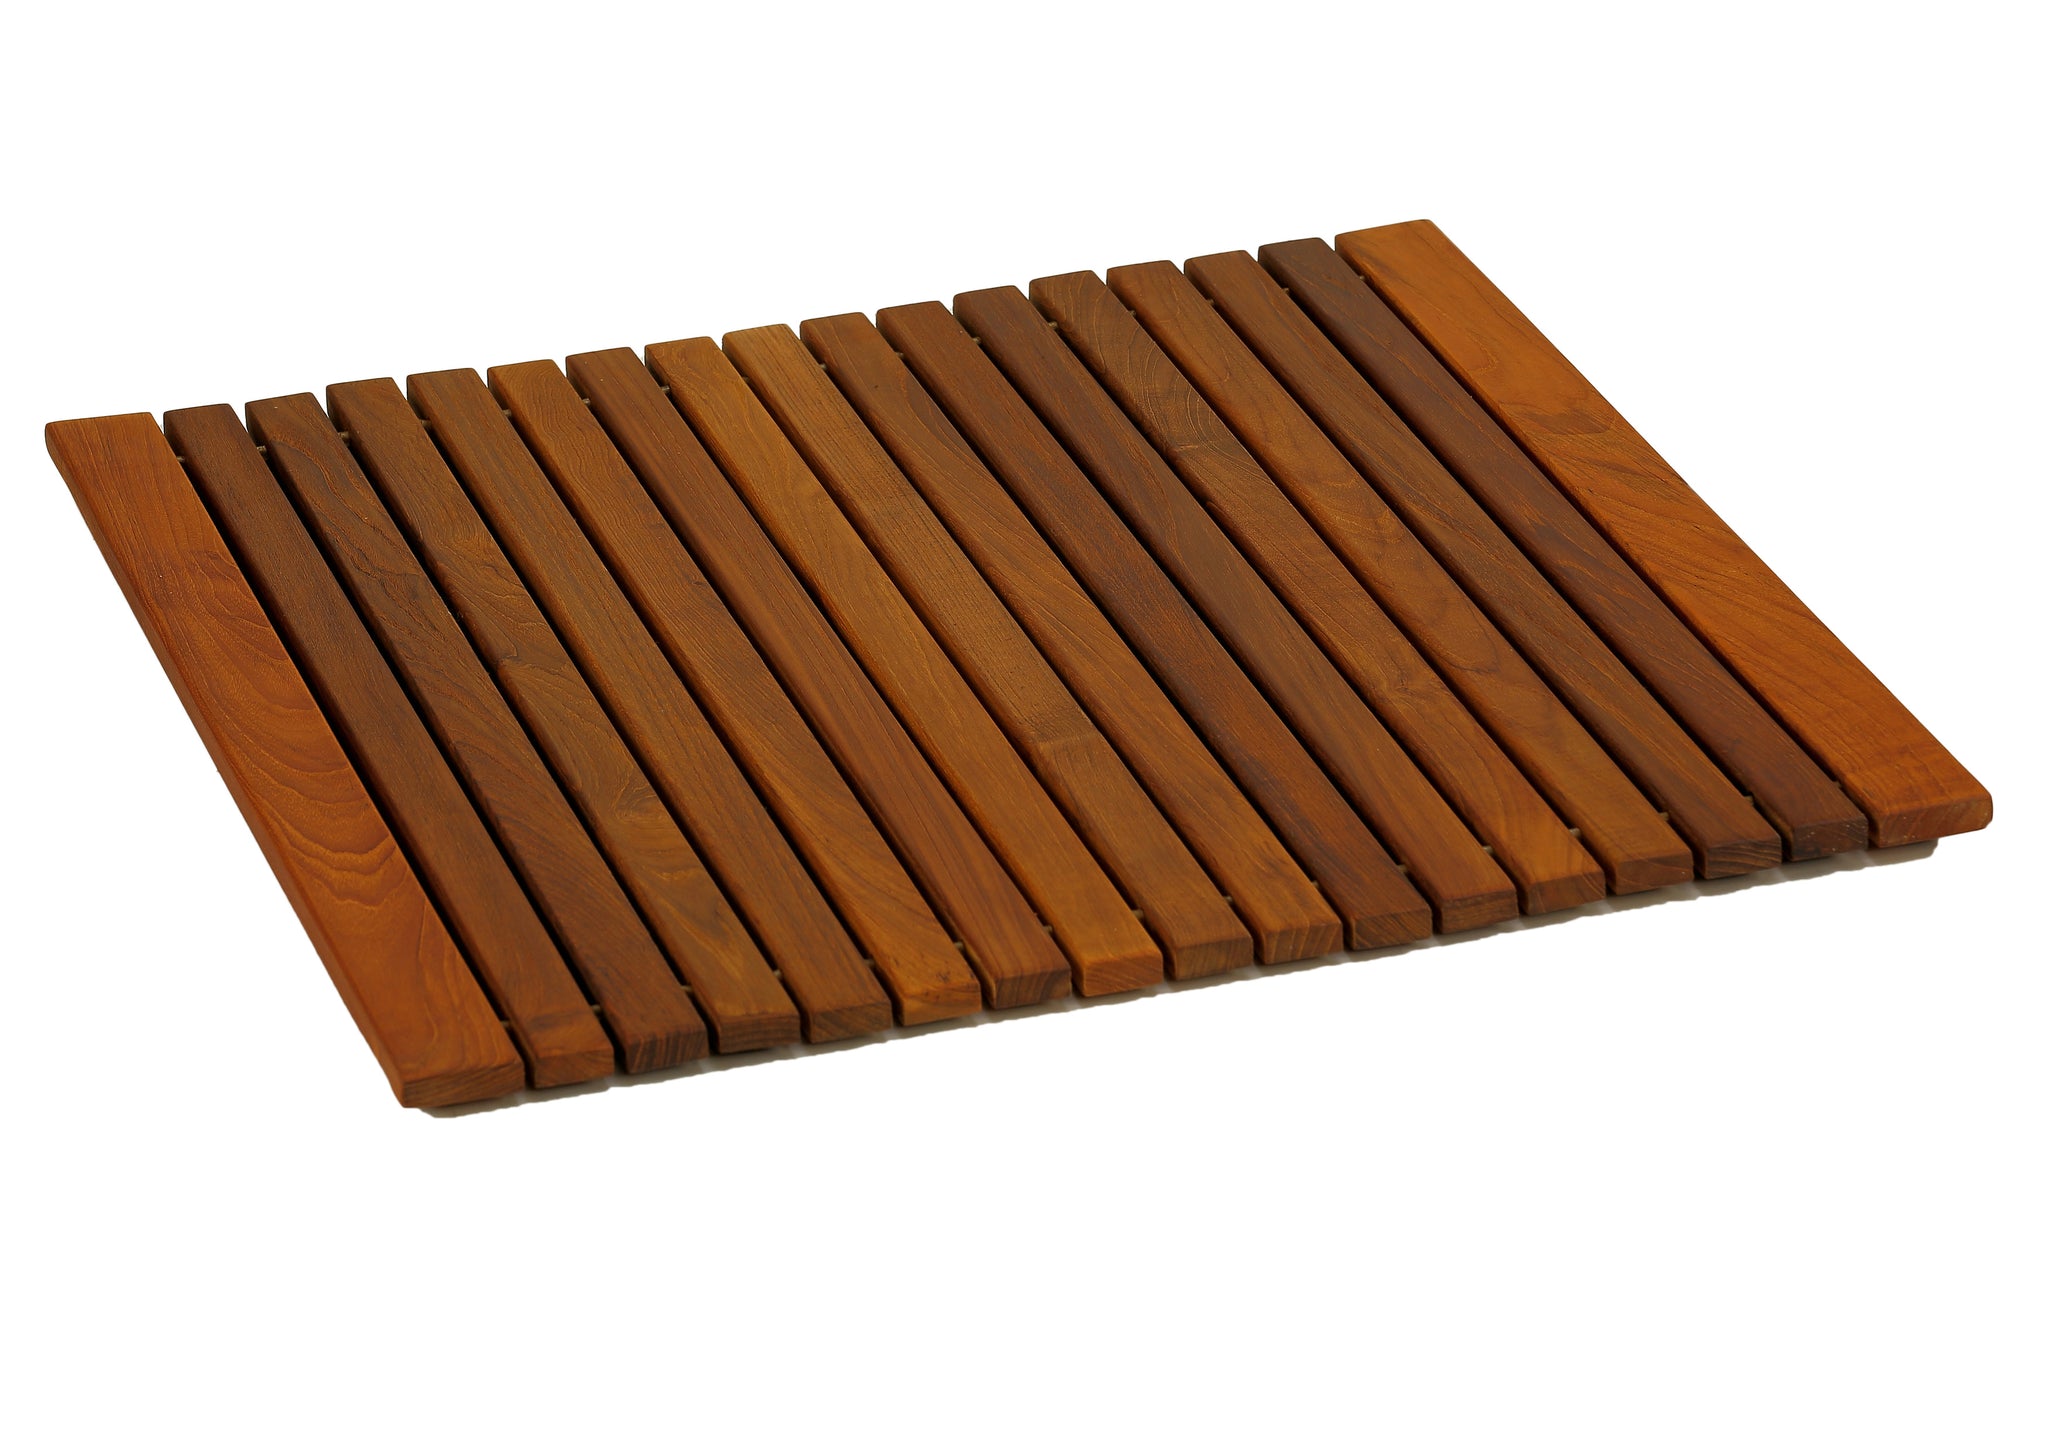 Bare Decor Lykos String Spa Shower Mat in Solid Teak Wood Oiled Finish, Large: 24"x24"